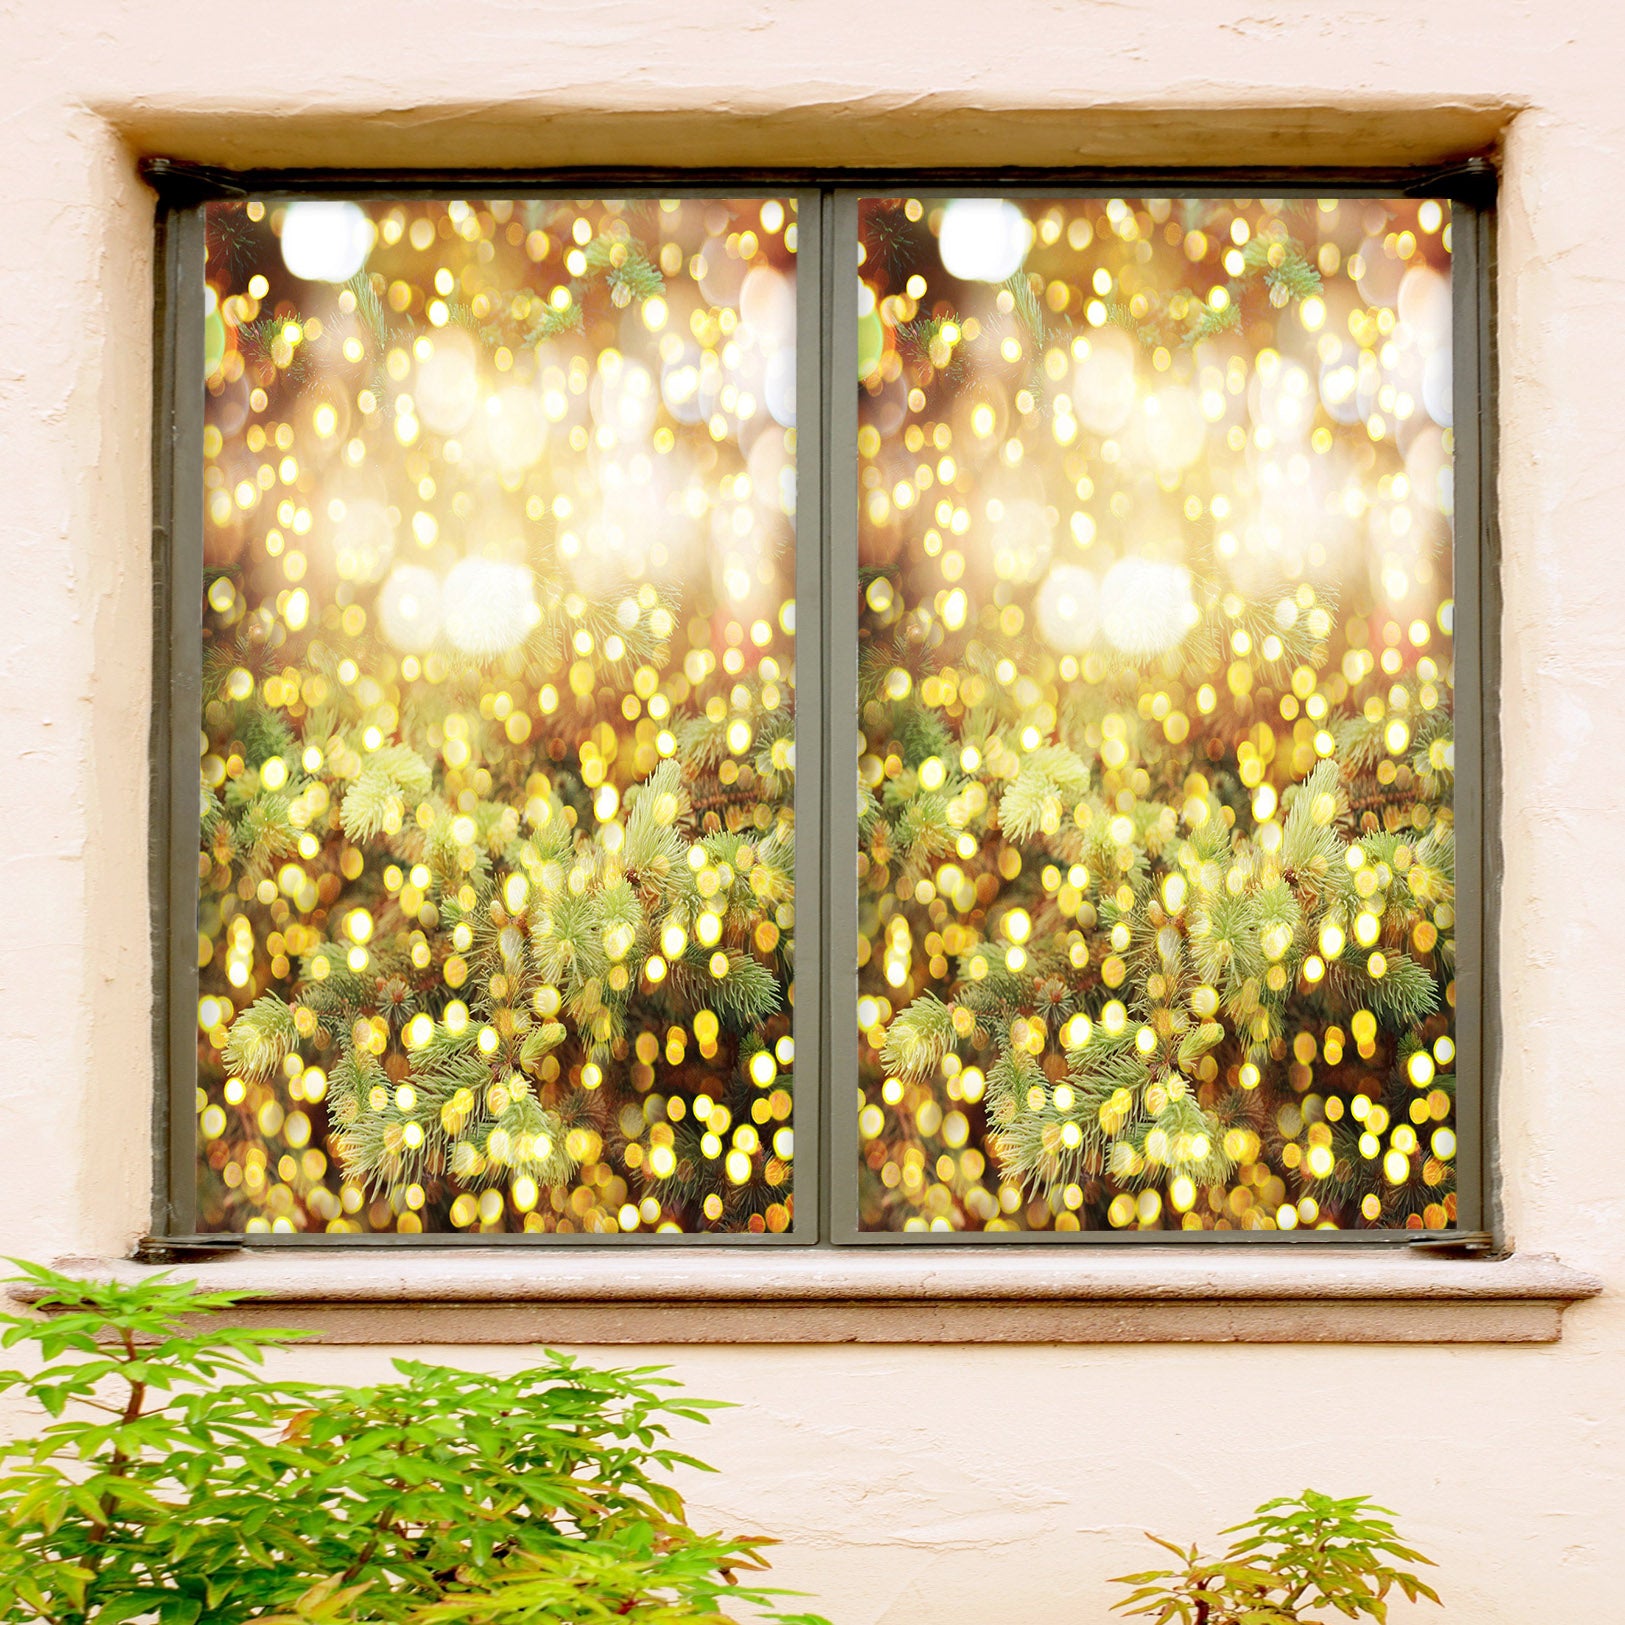 3D Light Shadow 30021 Christmas Window Film Print Sticker Cling Stained Glass Xmas